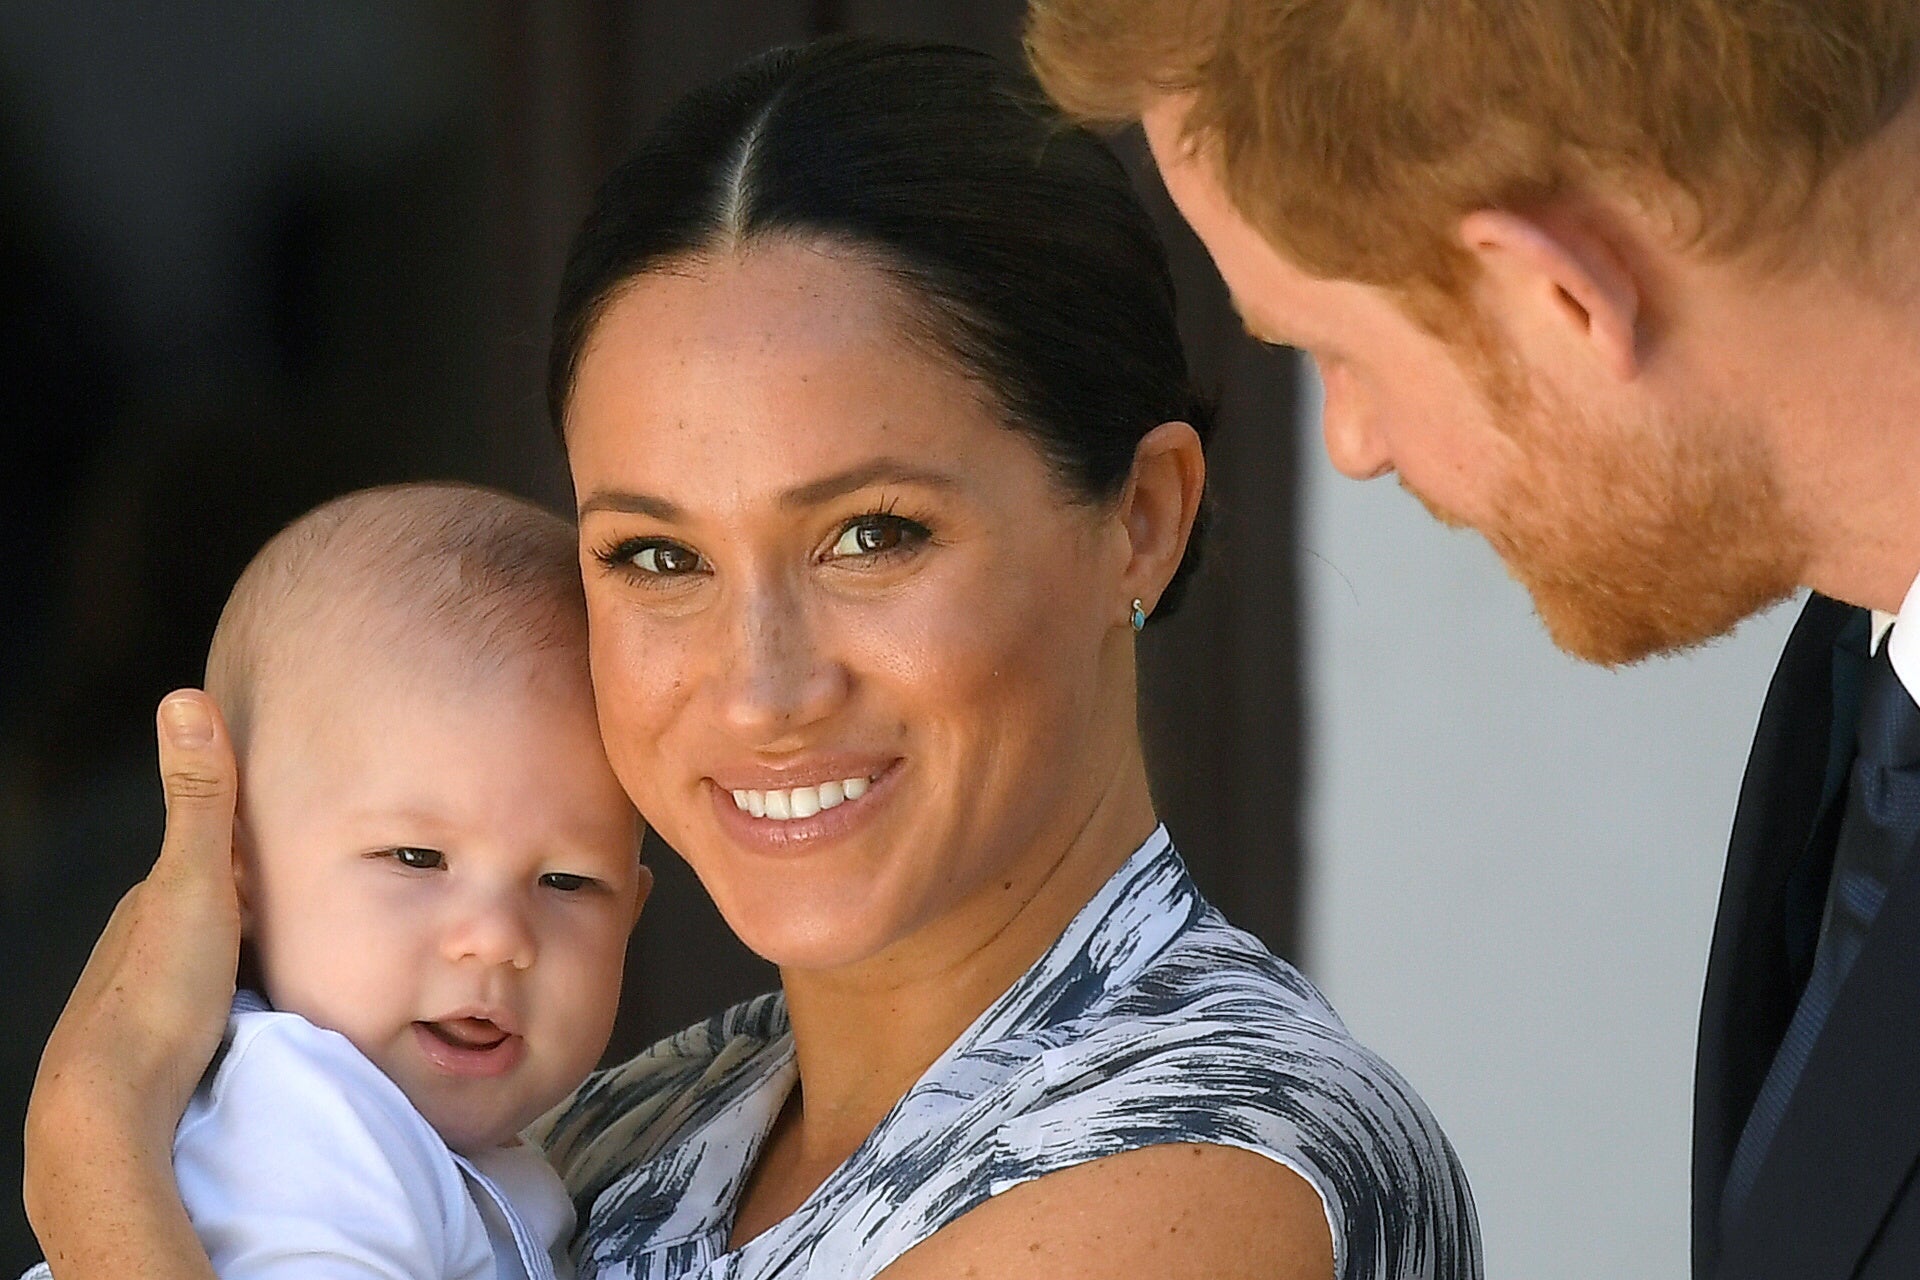 The Duke and Duchess of Sussex hold their son Archie during a visit to Africa (Toby Melville/PA)